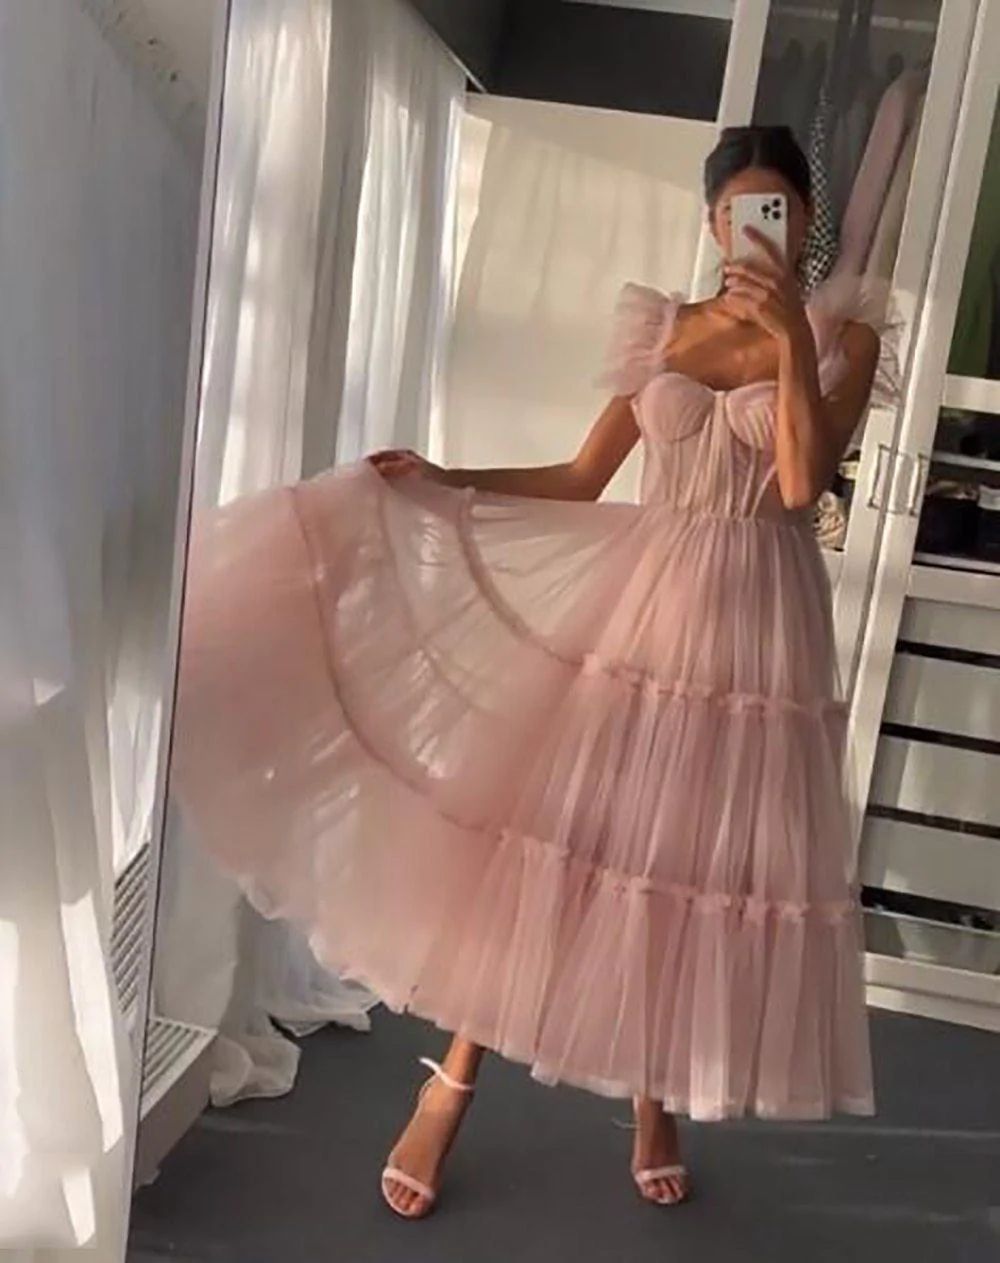 Dusty Rose Calf Length Wedding Guest Dress Cocktail Party Dress